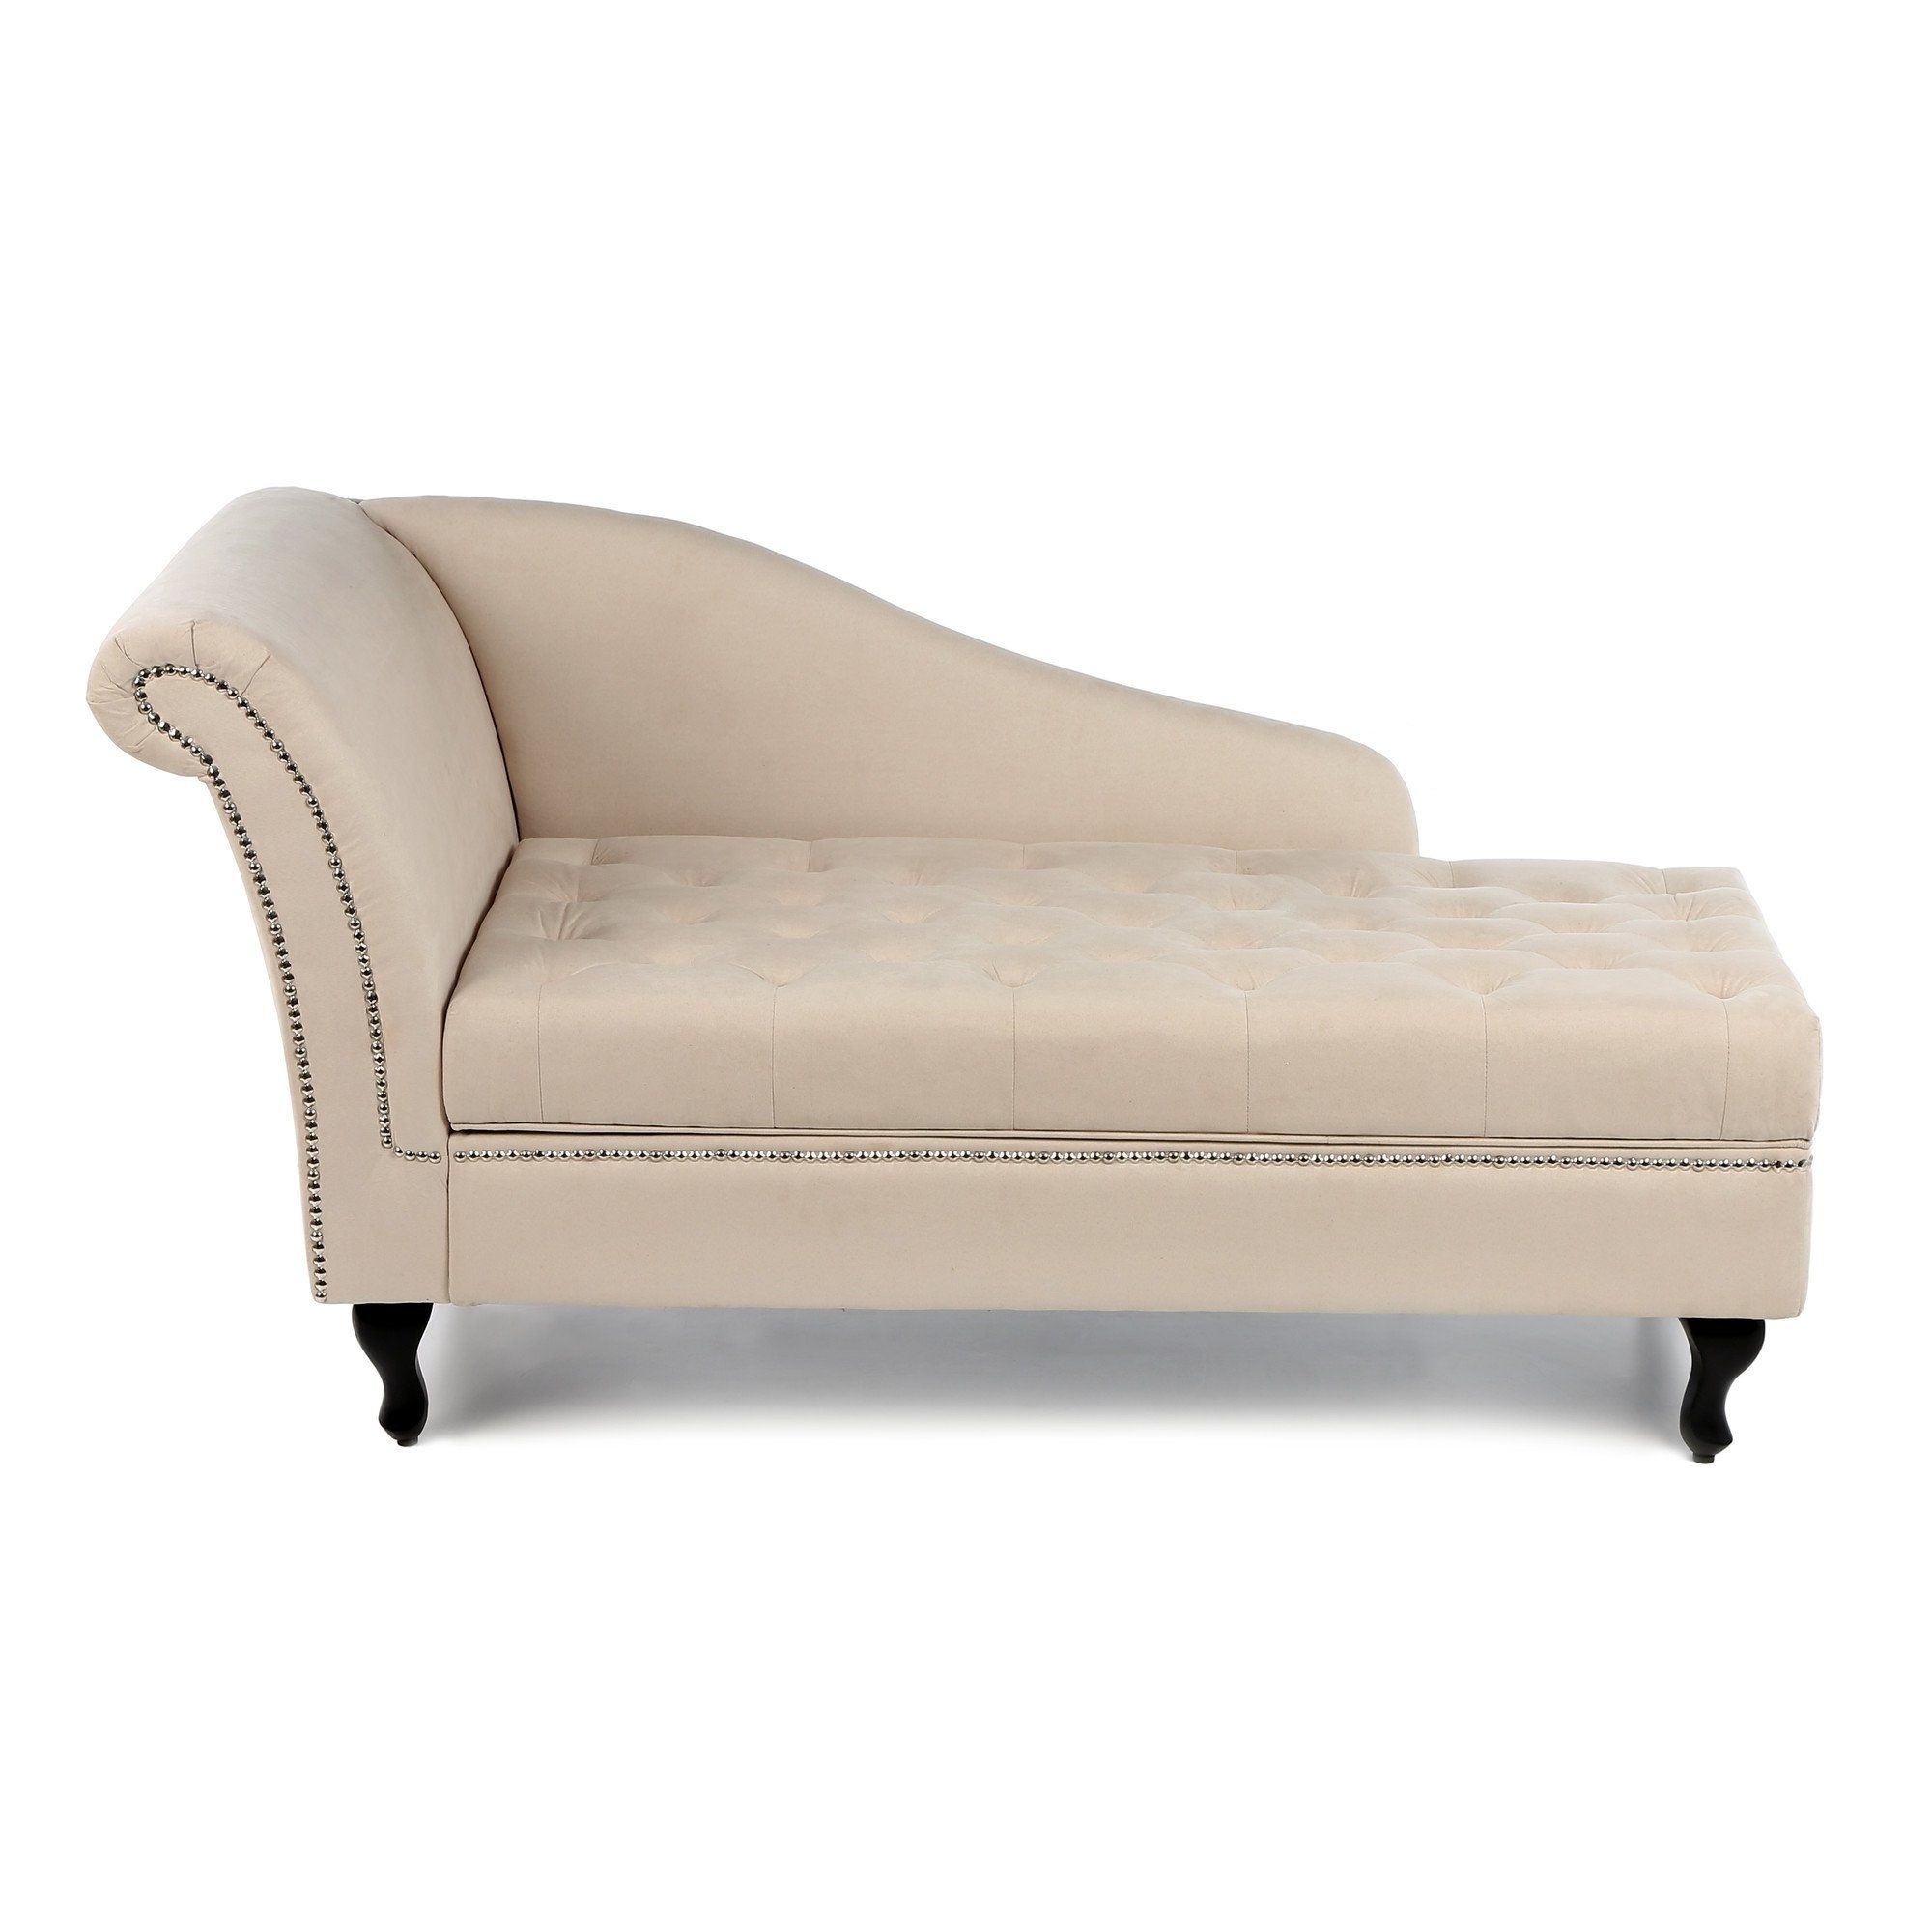 Preferred Beige Chaise Lounges Pertaining To $300 Amazon – Storage Chaise Lounge Luxurious Tufted Classic (View 7 of 15)